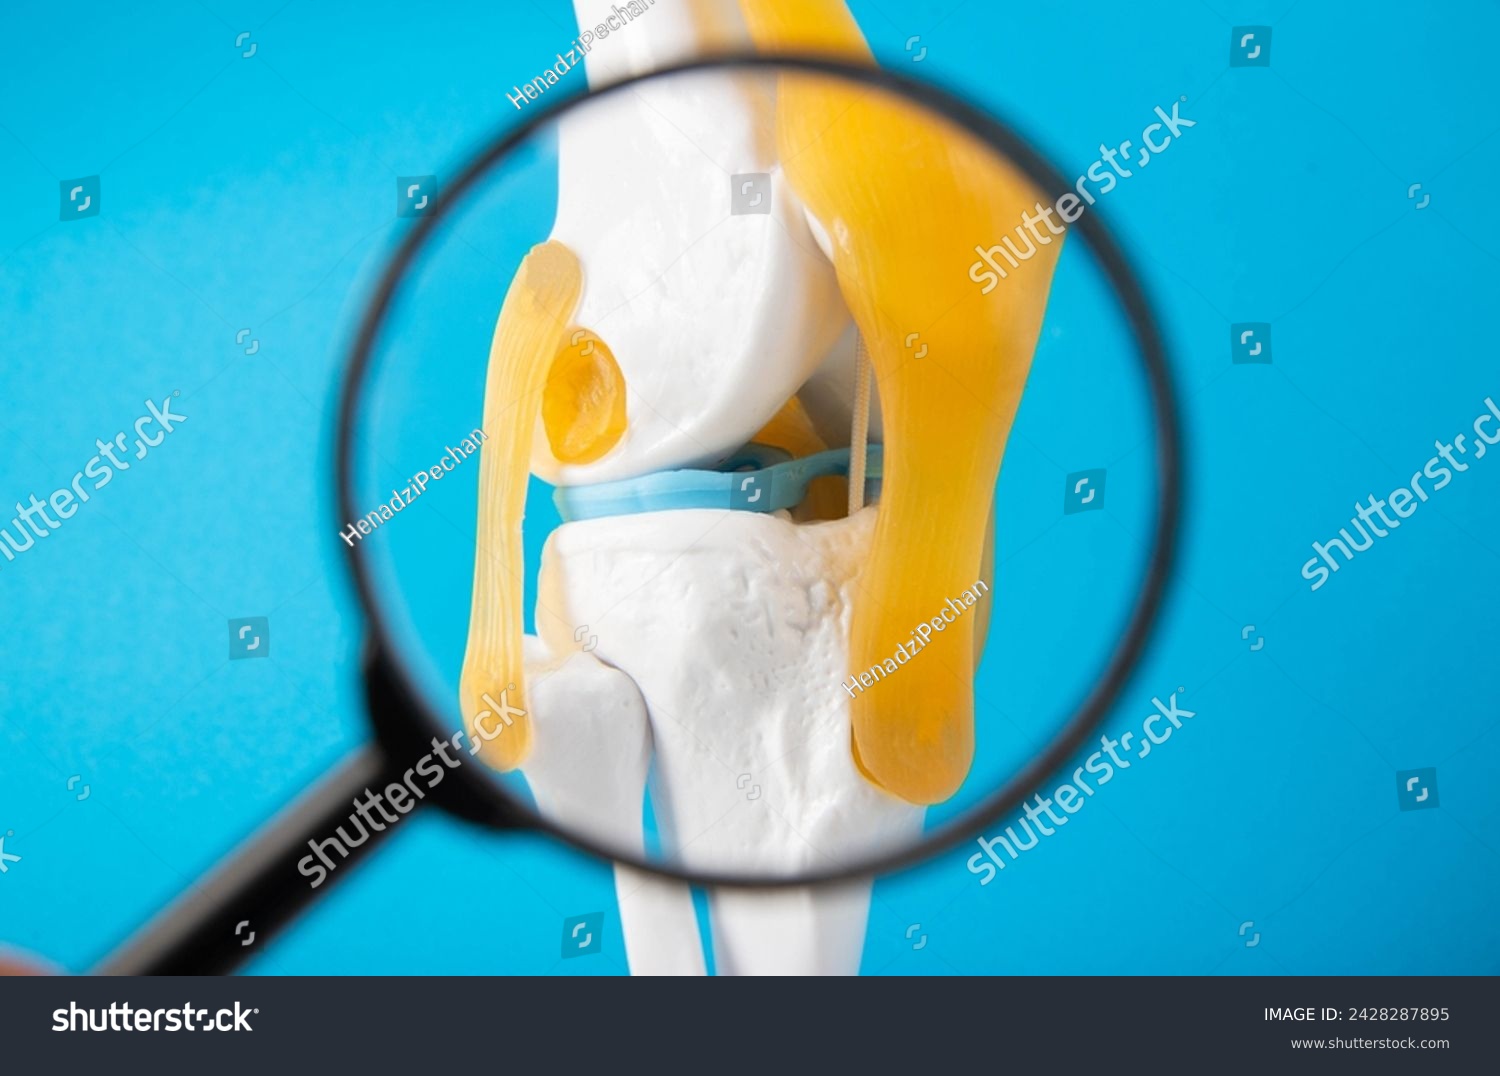 Medical mockup of a knee joint on a blue background under a magnifying glass. Knee joint problems concept. Bursitis, tendonitis and gout. Orthopedics #2428287895